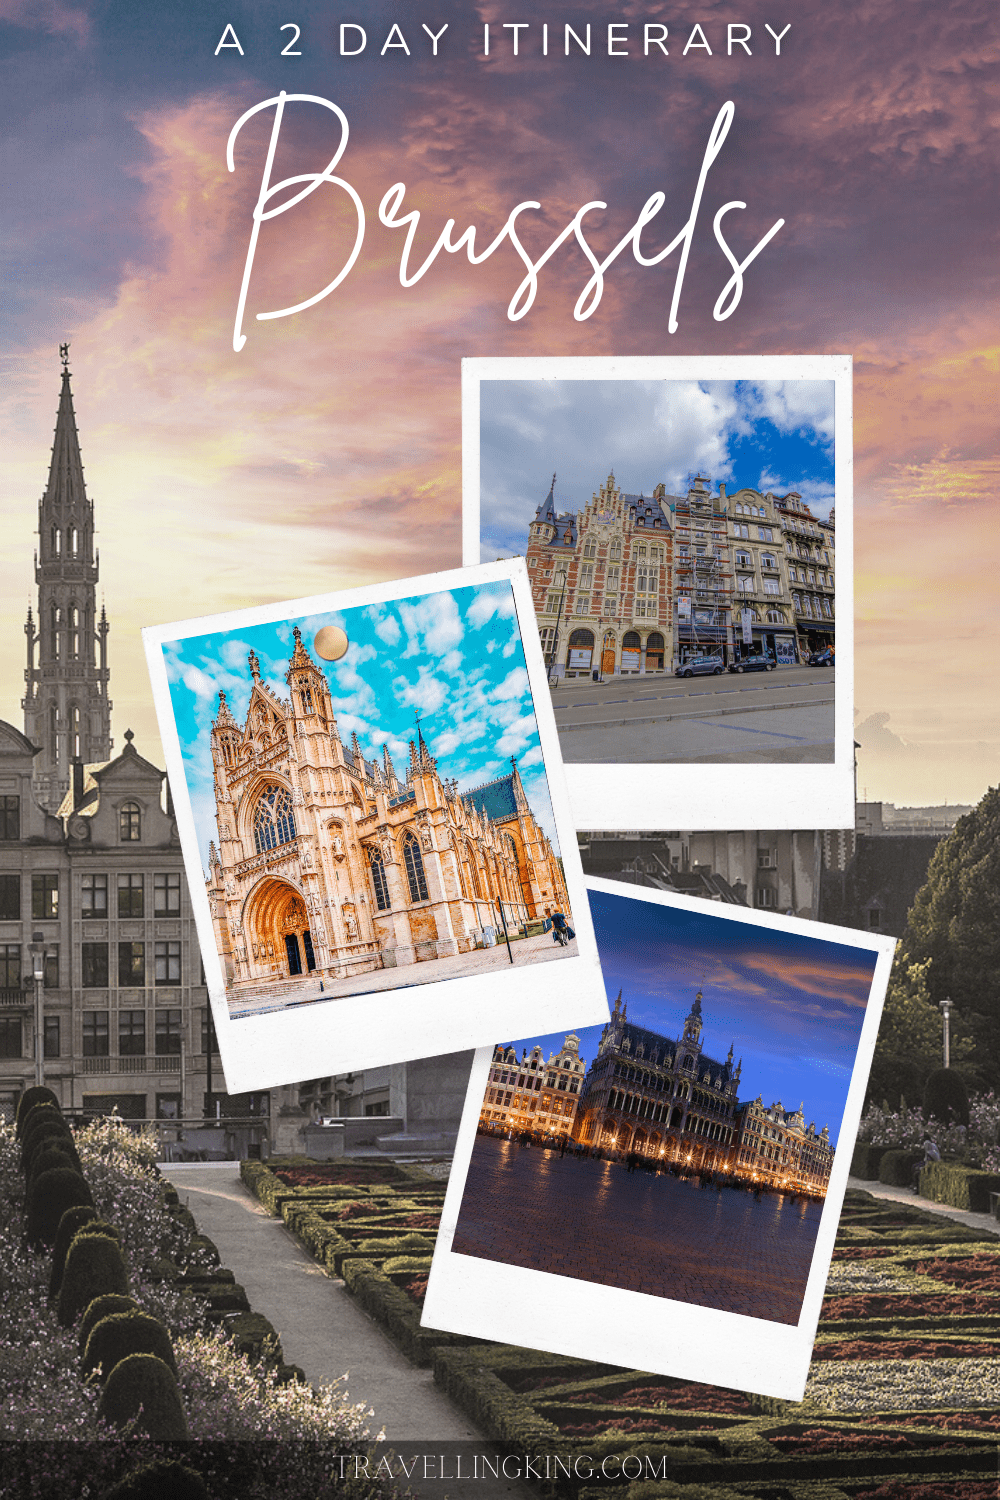 48 Hours in Brussels - A 2 day Itinerary